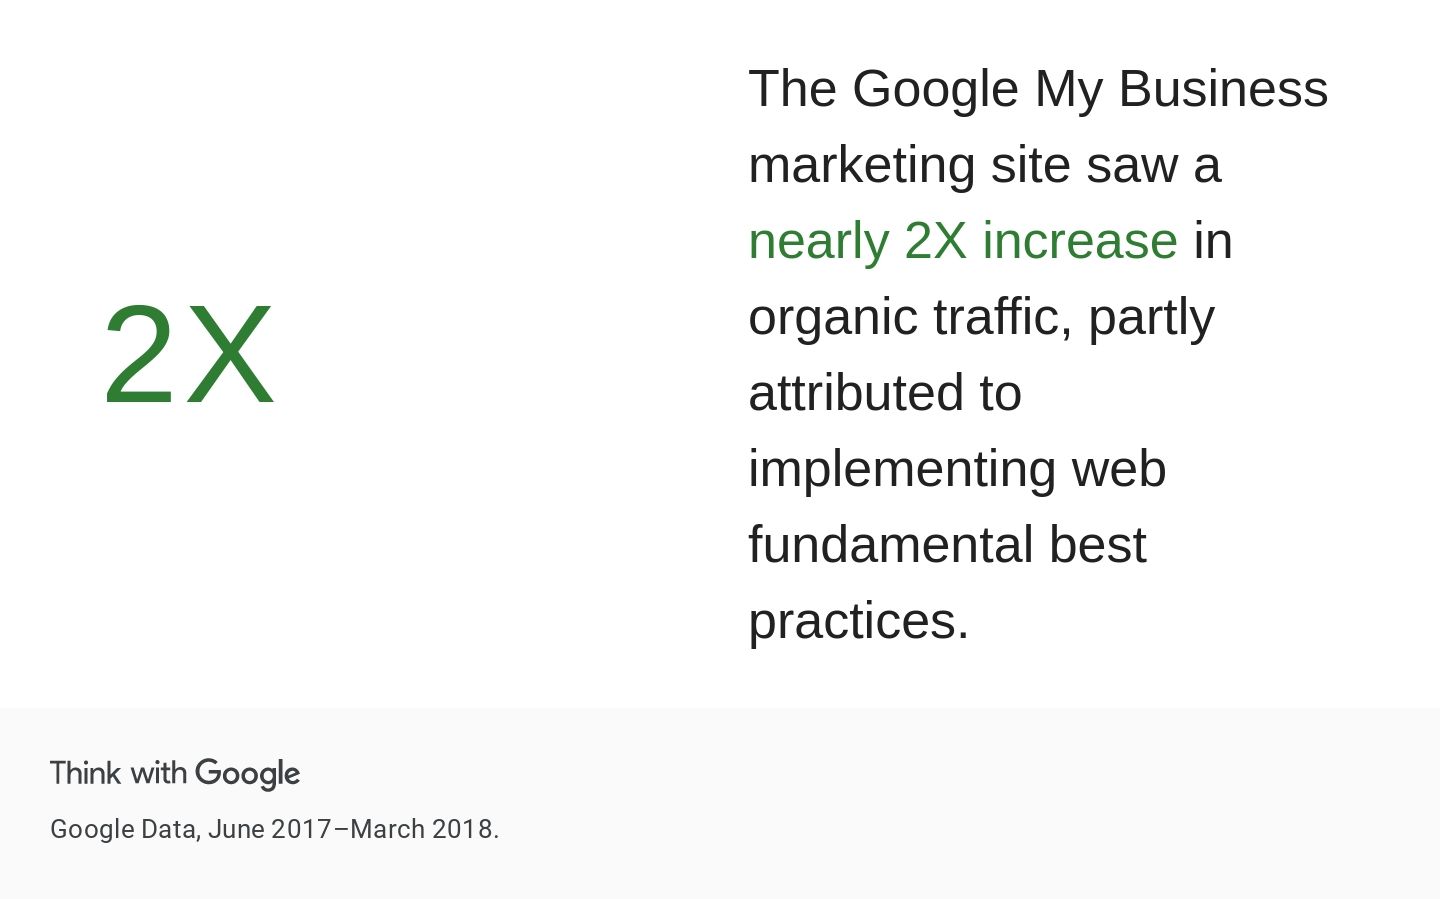 Google My Business gives 2x increase in organic traffic for businesses.